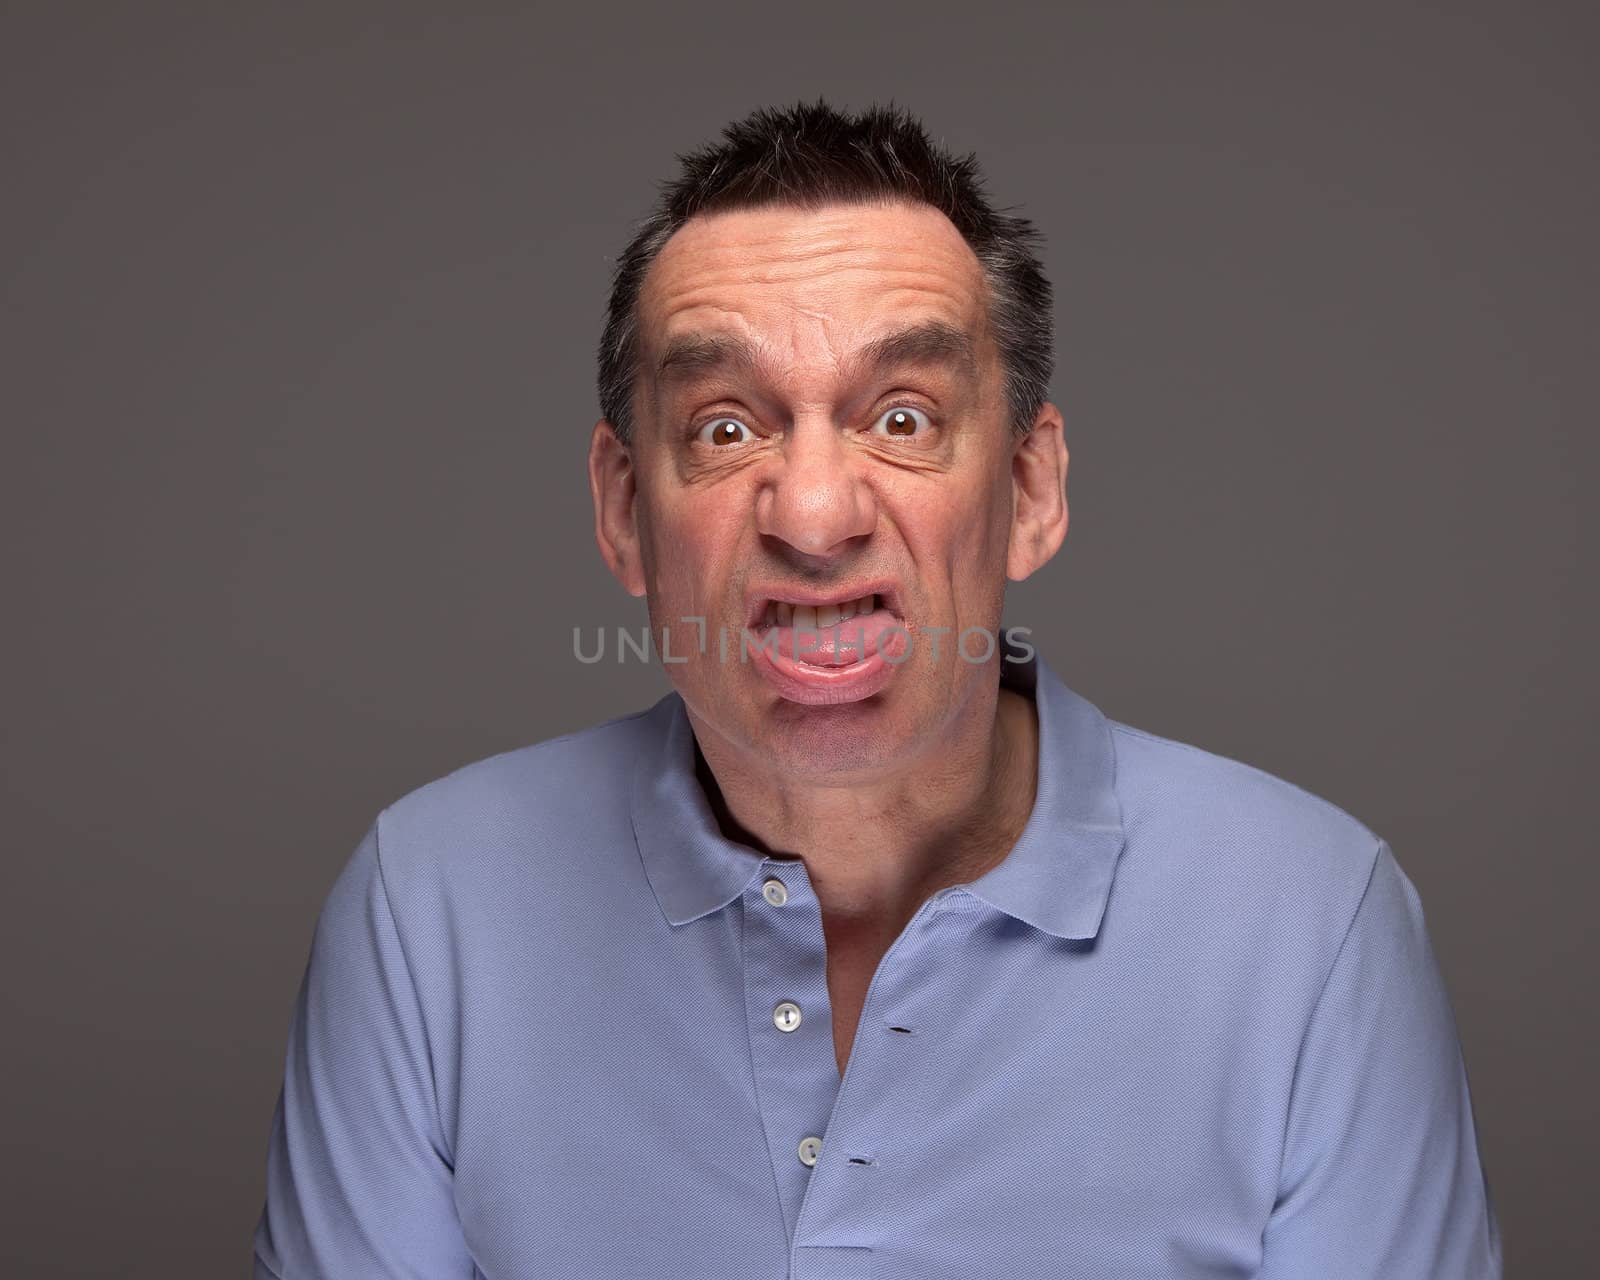 Handsome Middle Age Man Pulling Face Sticking Out Tongue on Grey Background